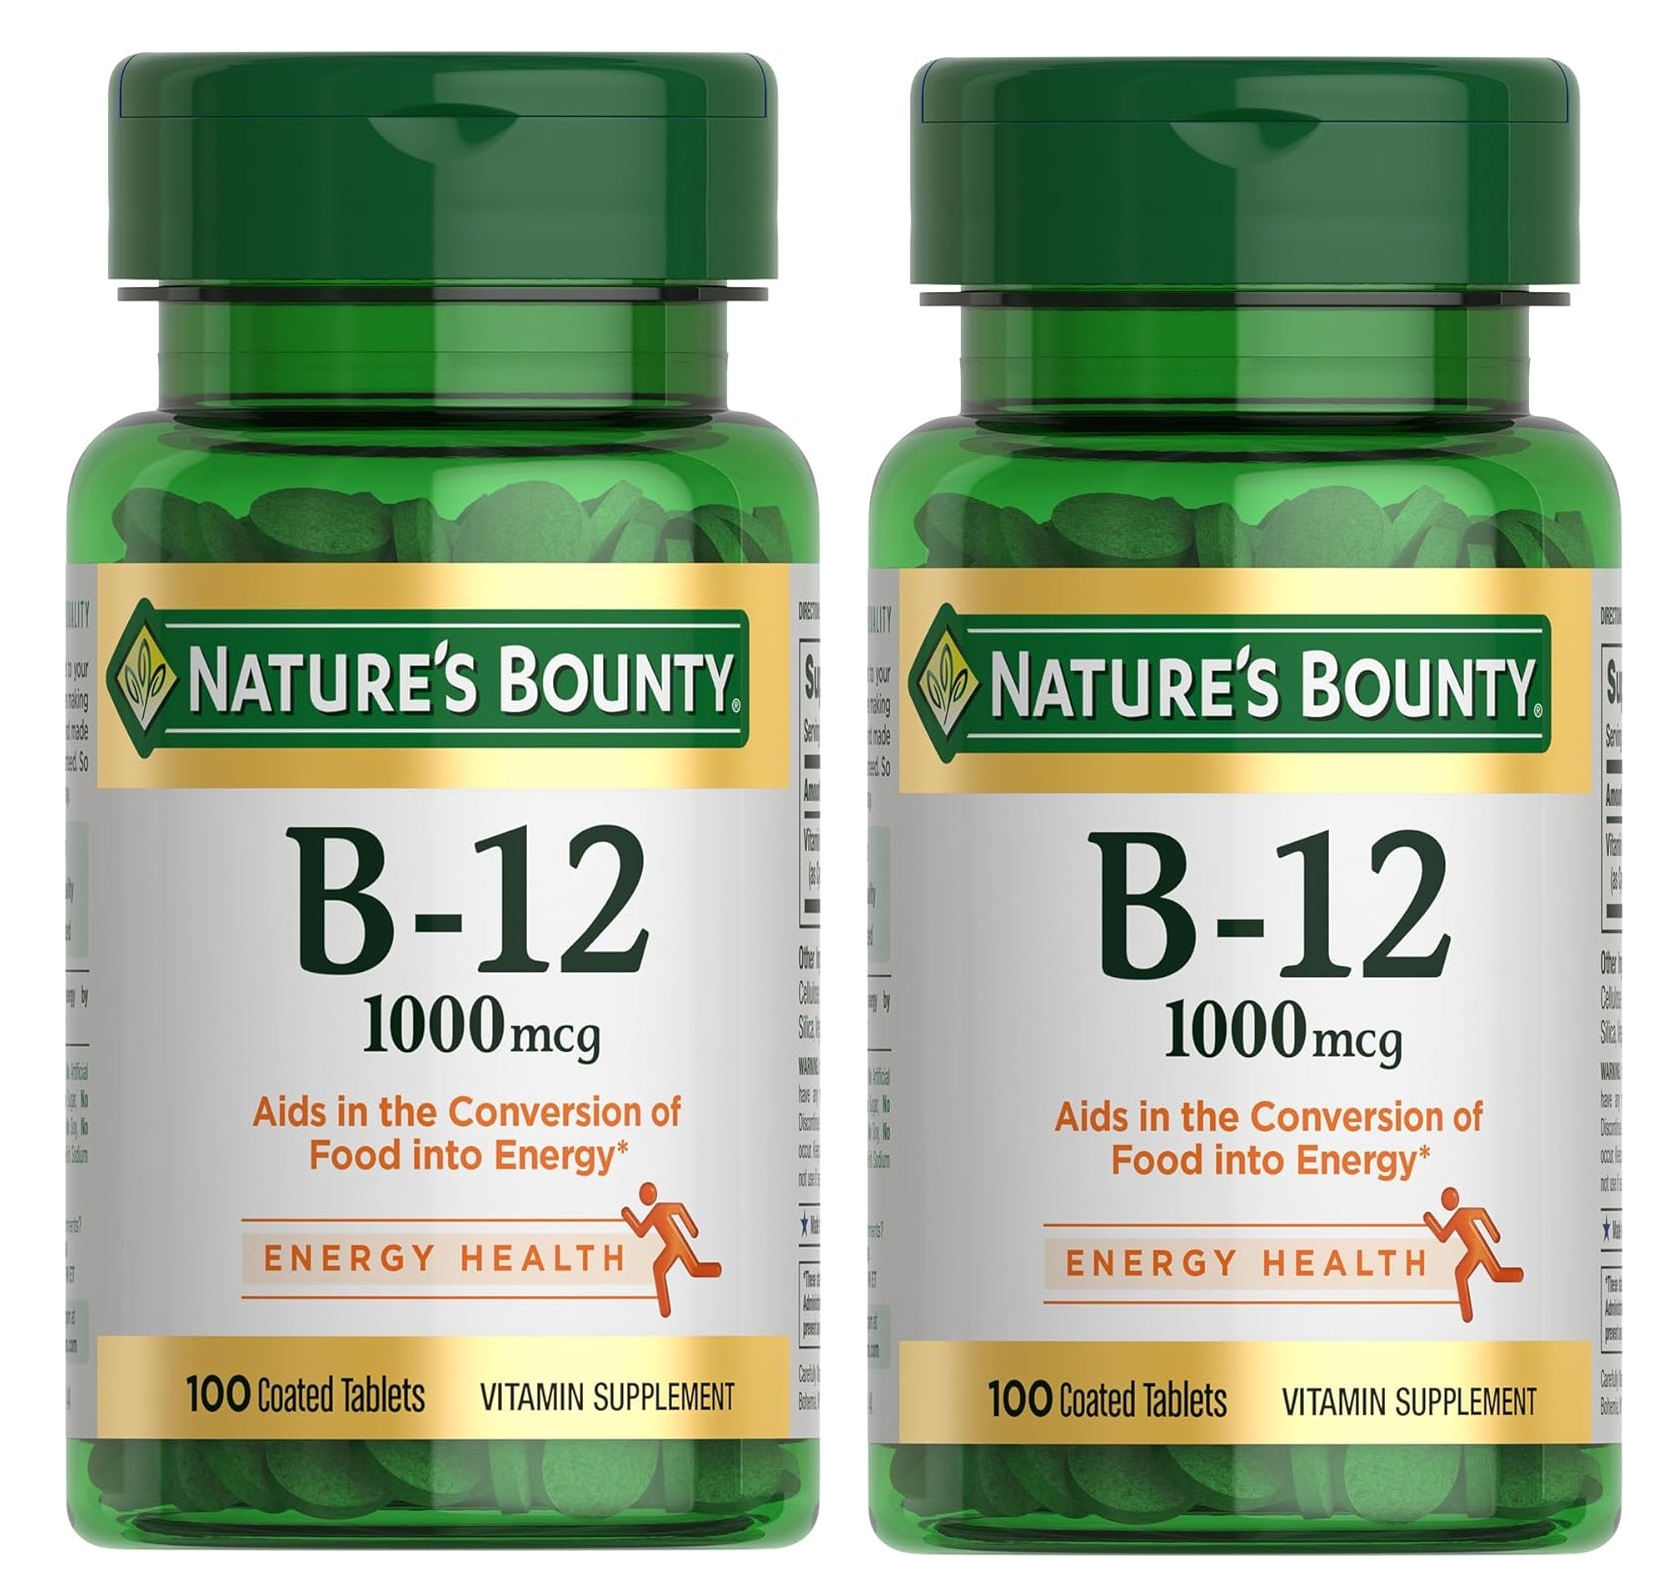 Nature's Bounty Vitamins & Supplements: Buy 1 Get 1 Free + 30% Off: 100-Count Vitamin B12 1000mcg Coated Tablets 2 for $6.80 & More w/ S&S + Free Shipping w/ Prime or on $35+